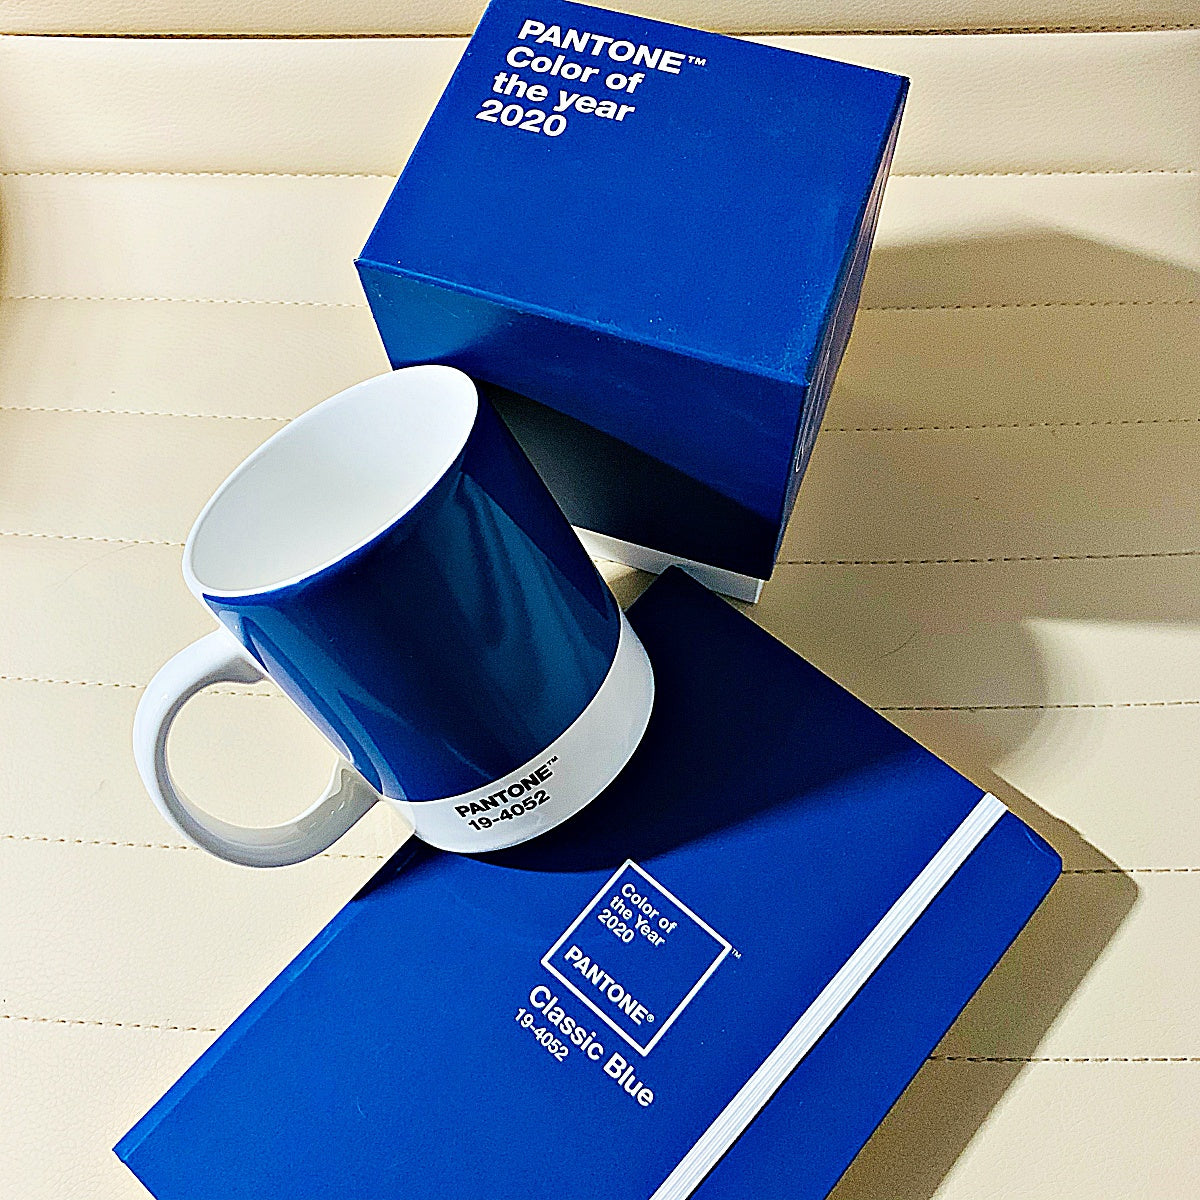 Pantone Color of the Year 2020 - Classic Blue - Cup and Notebook